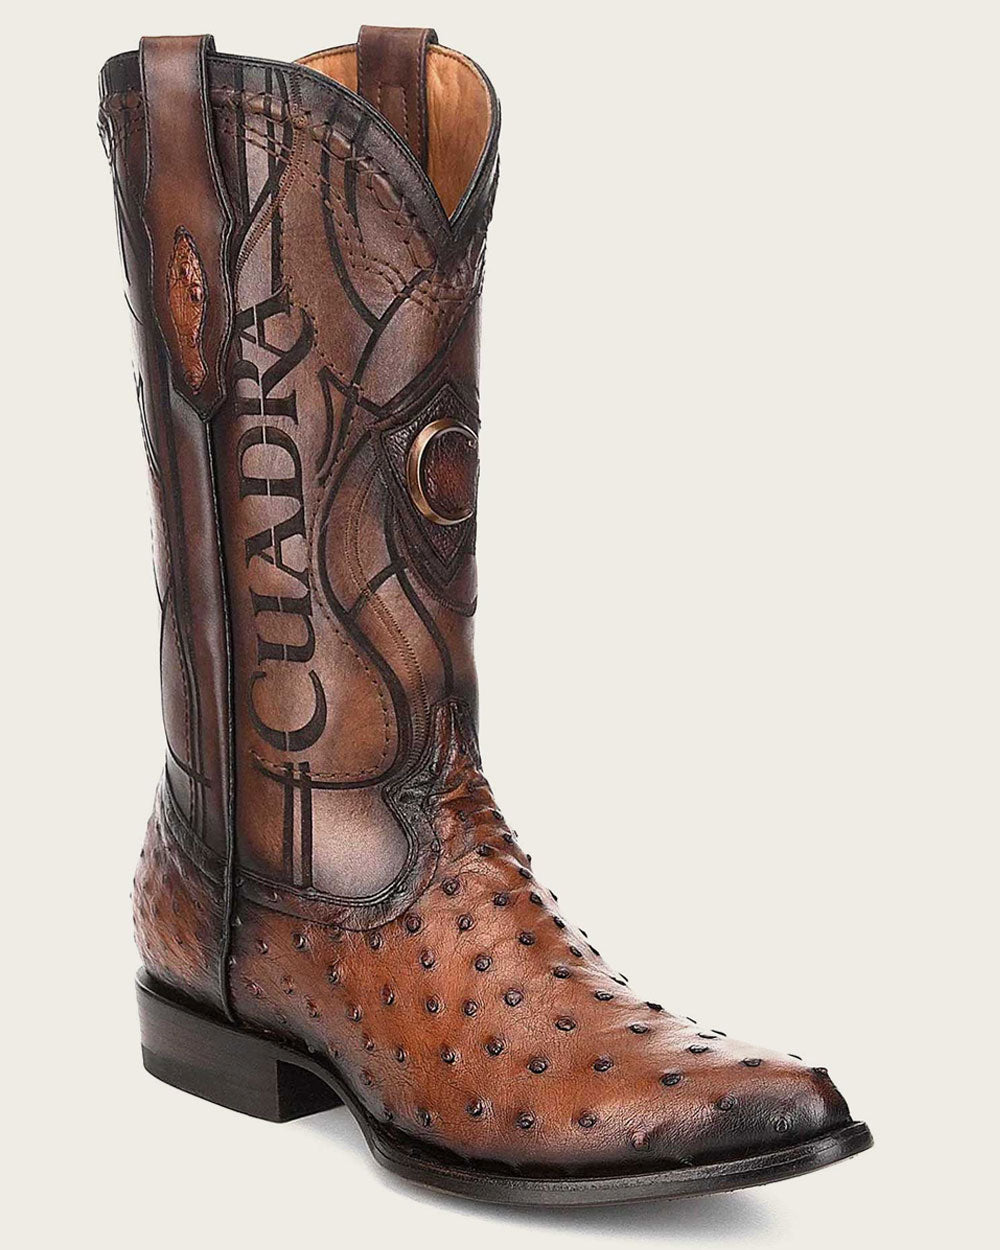 Hand-Painted Engraved Details: Brown cowboy boots showcase hand-painting and laser engravings for a unique touch